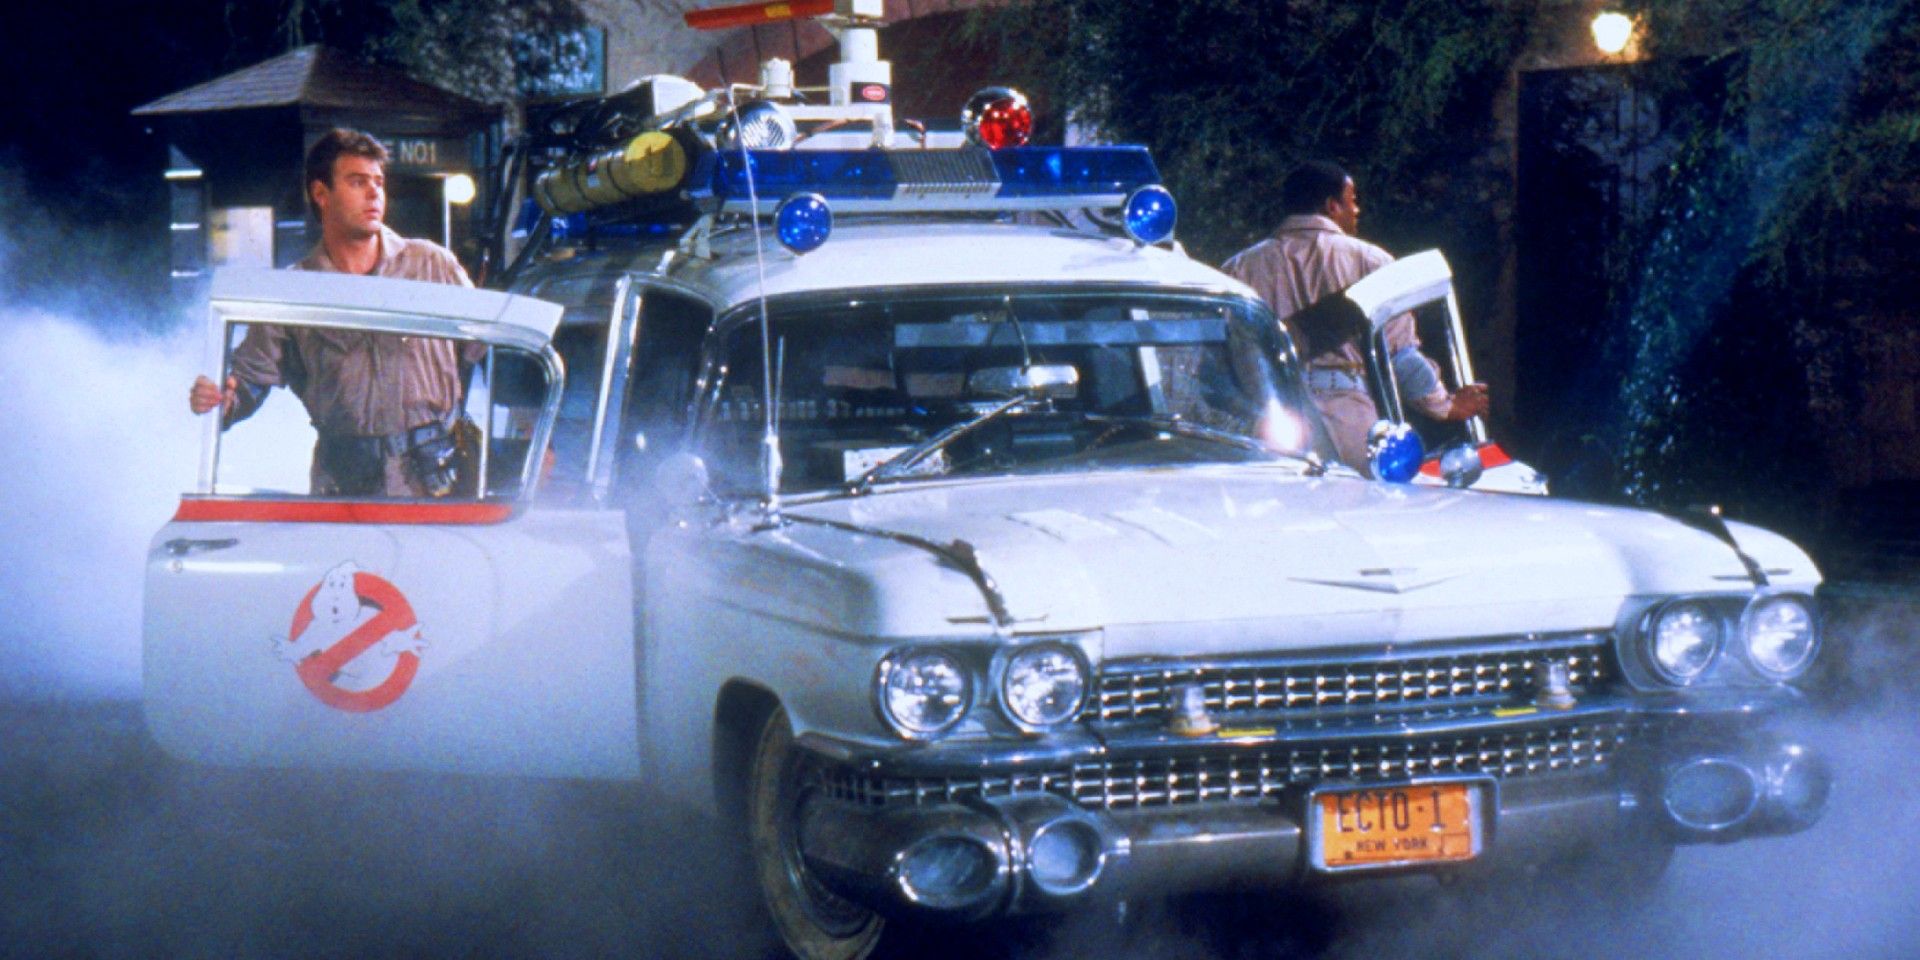 The Ghostbusters disembark from the Ecto-1